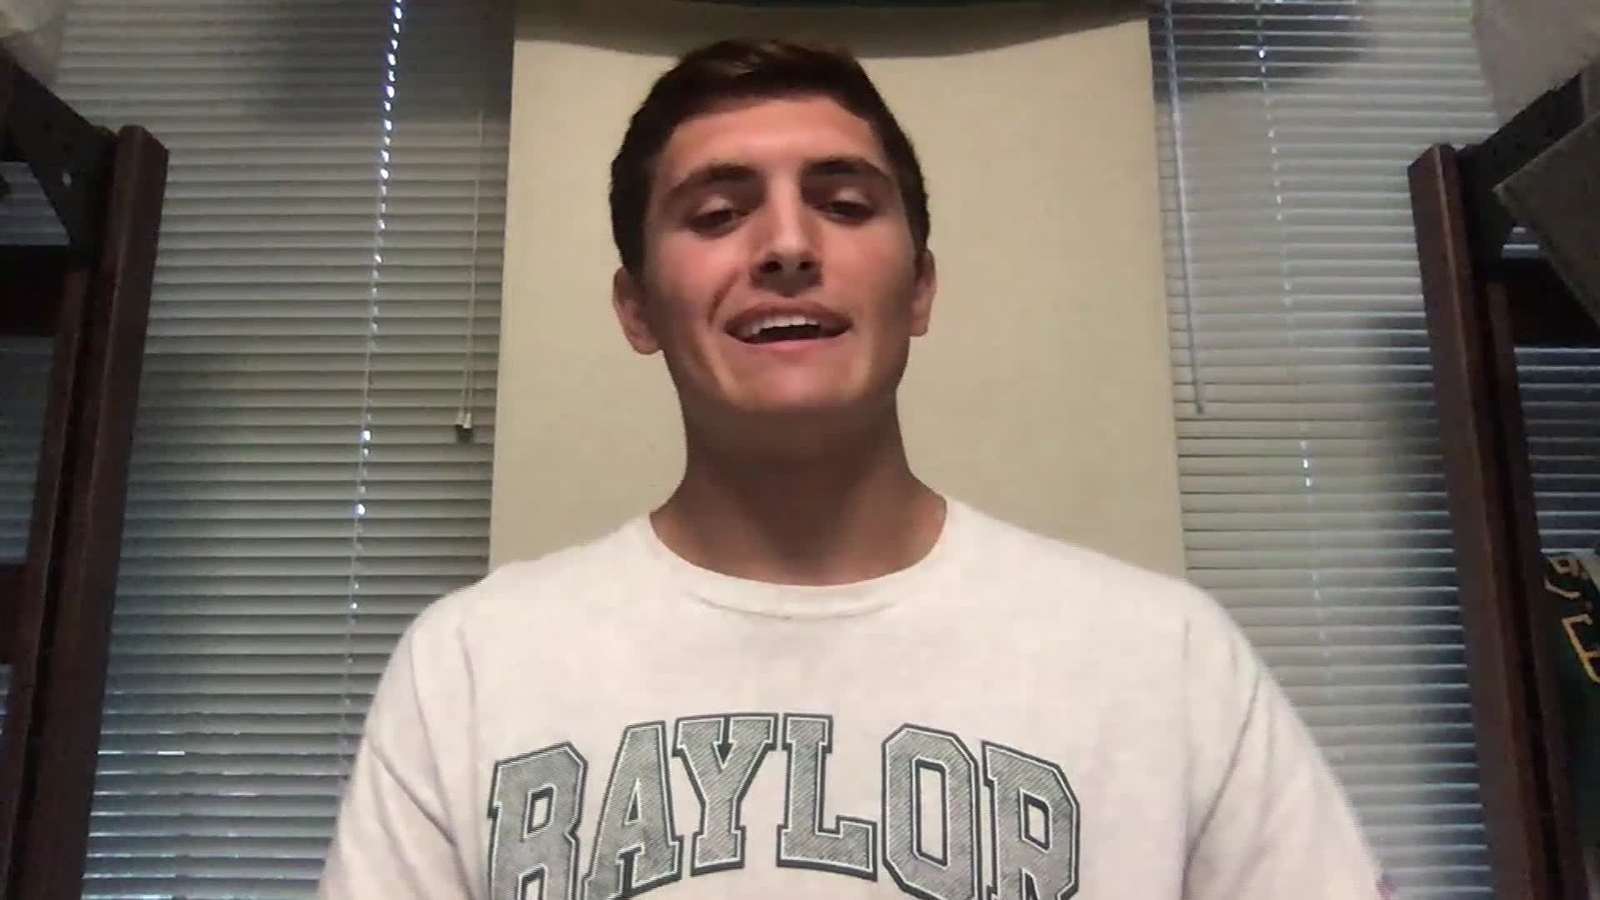 Nicko Henderson, a freshman at Baylor University in Texas.